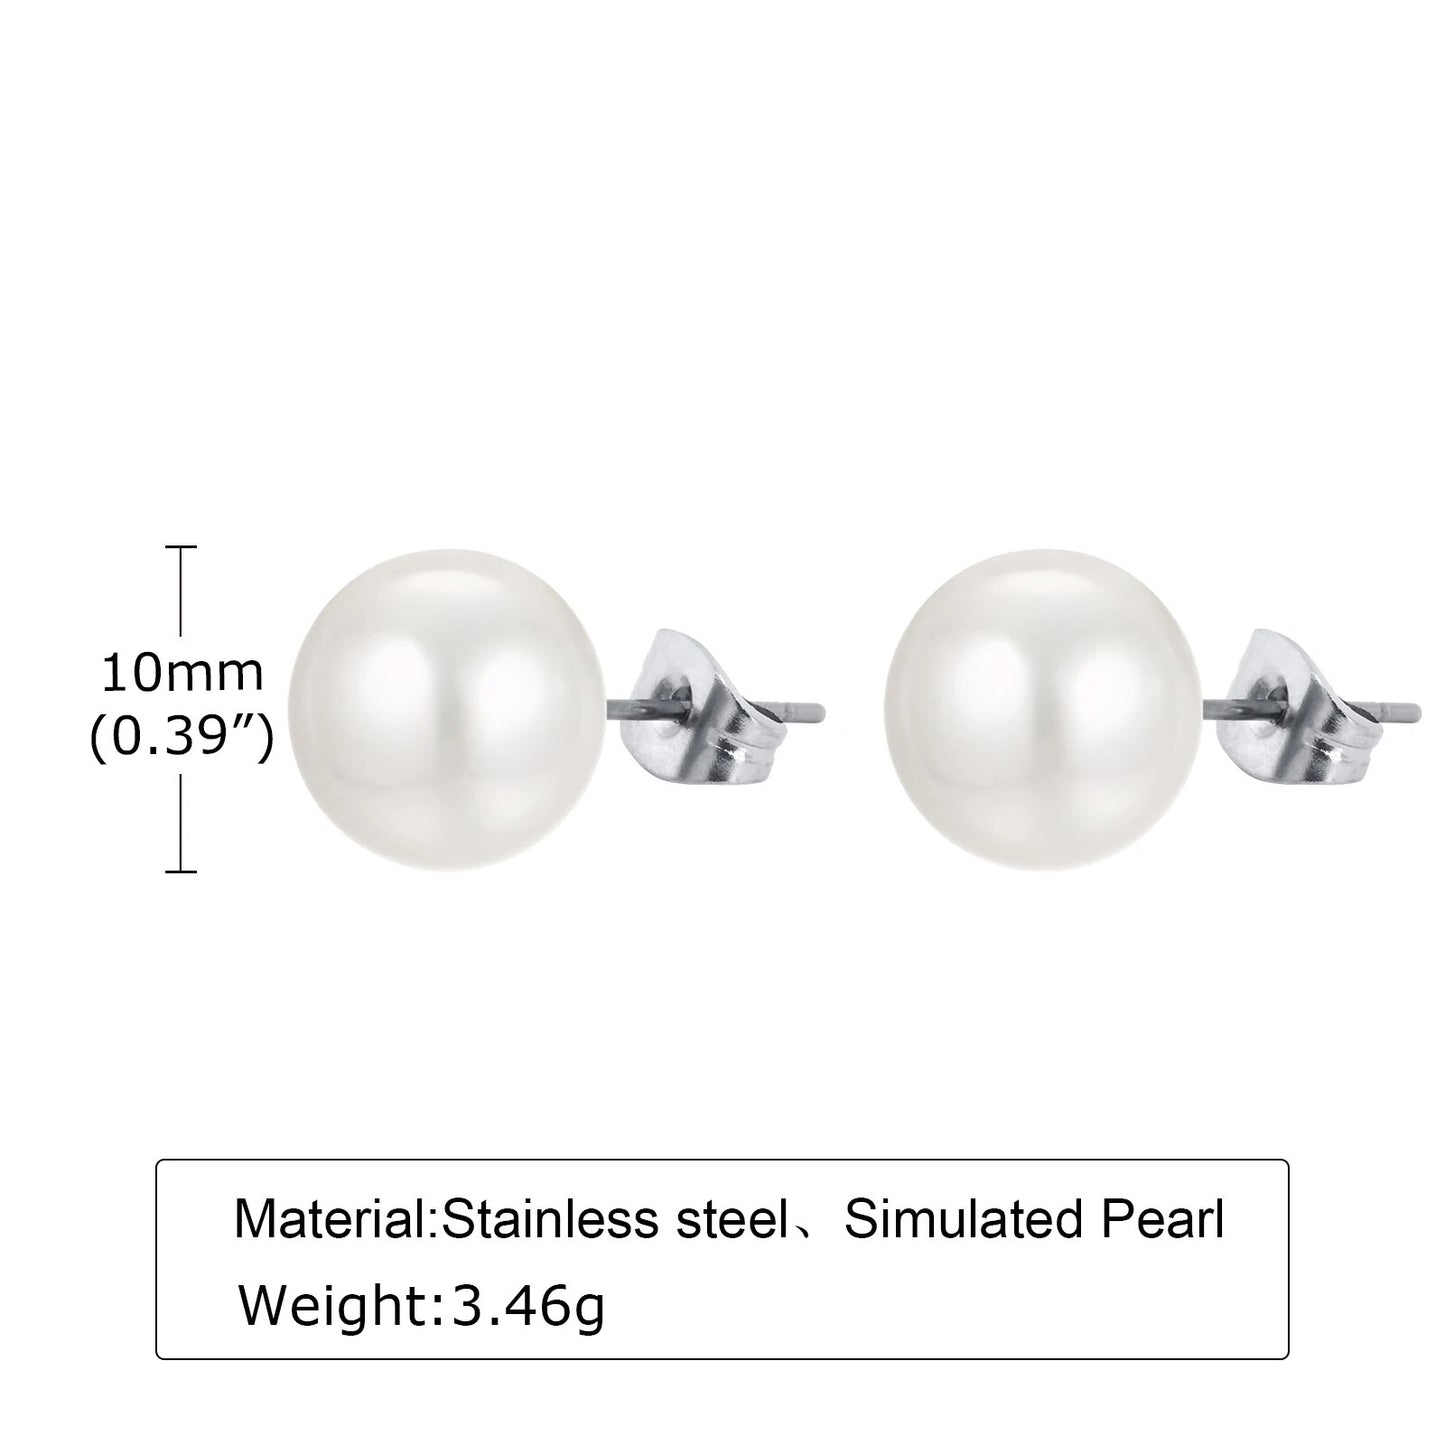 Women's Earrings Aretes para mujeres 10mm Simulated Pearl Earrings for Women, Simple Round Stud Earrings, Classic Vintage Simple Jewelry